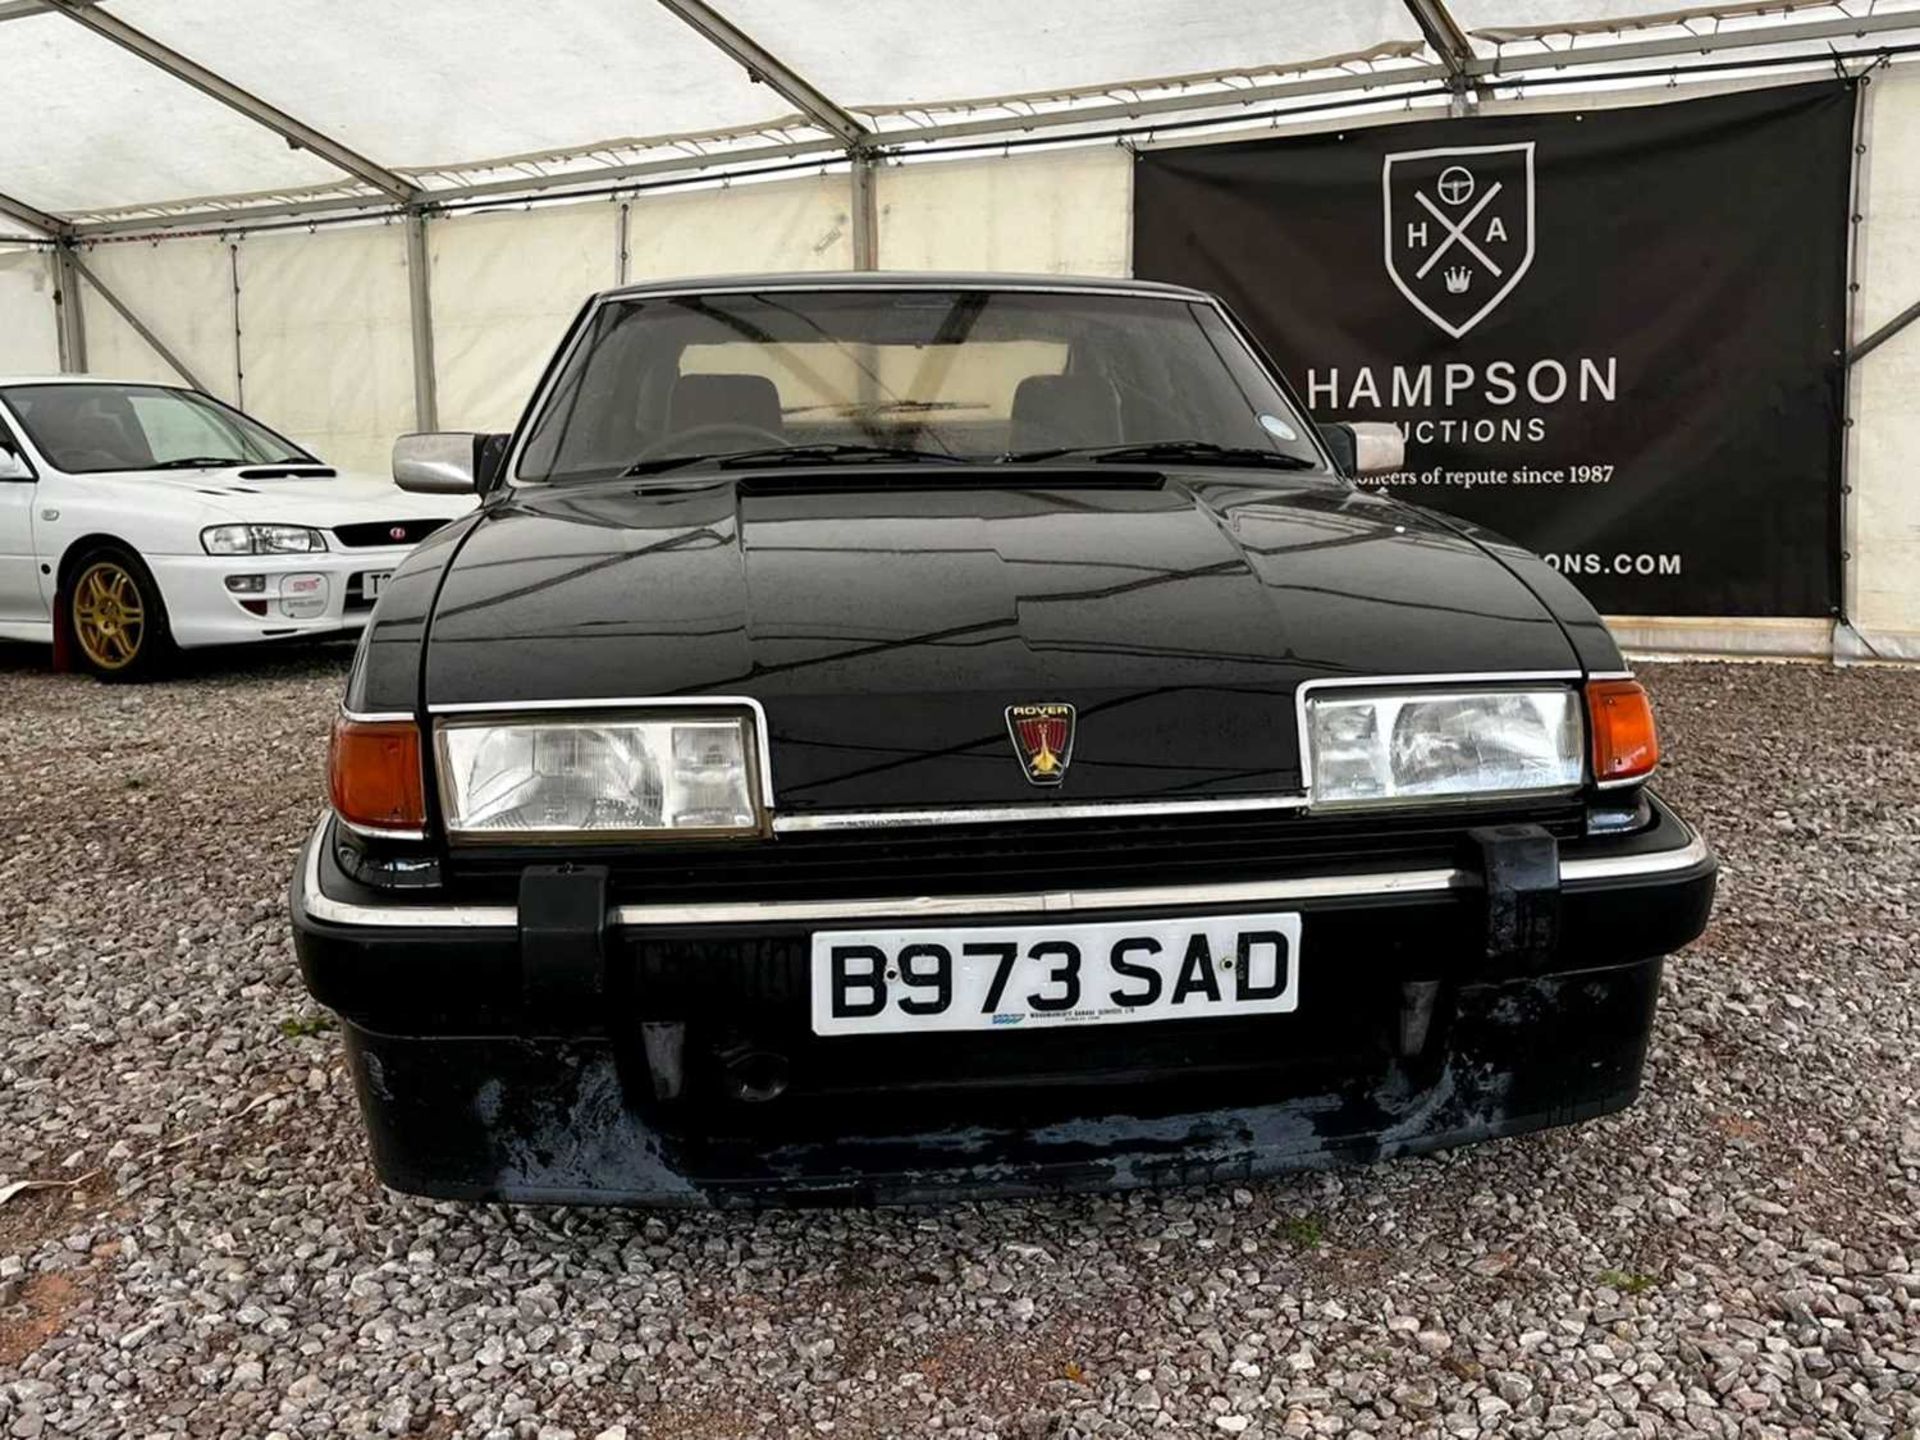 1985 Rover SD1 Vitesse One owner from new, in very original condition - Image 2 of 16